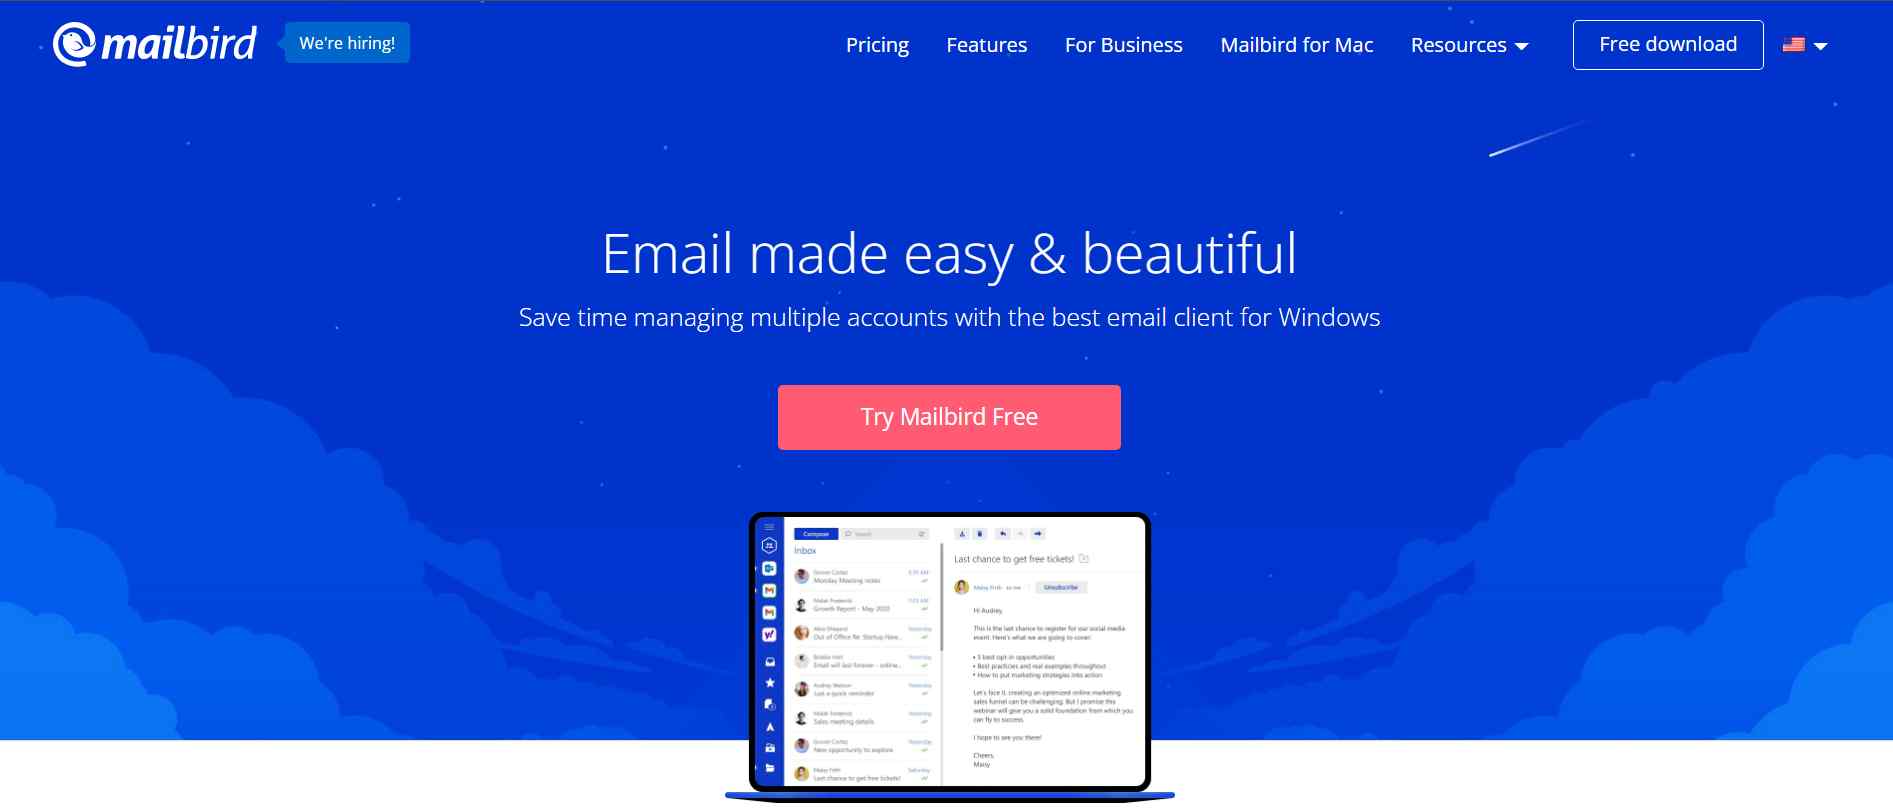 Mailbird is a powerful email client that is easy to use.